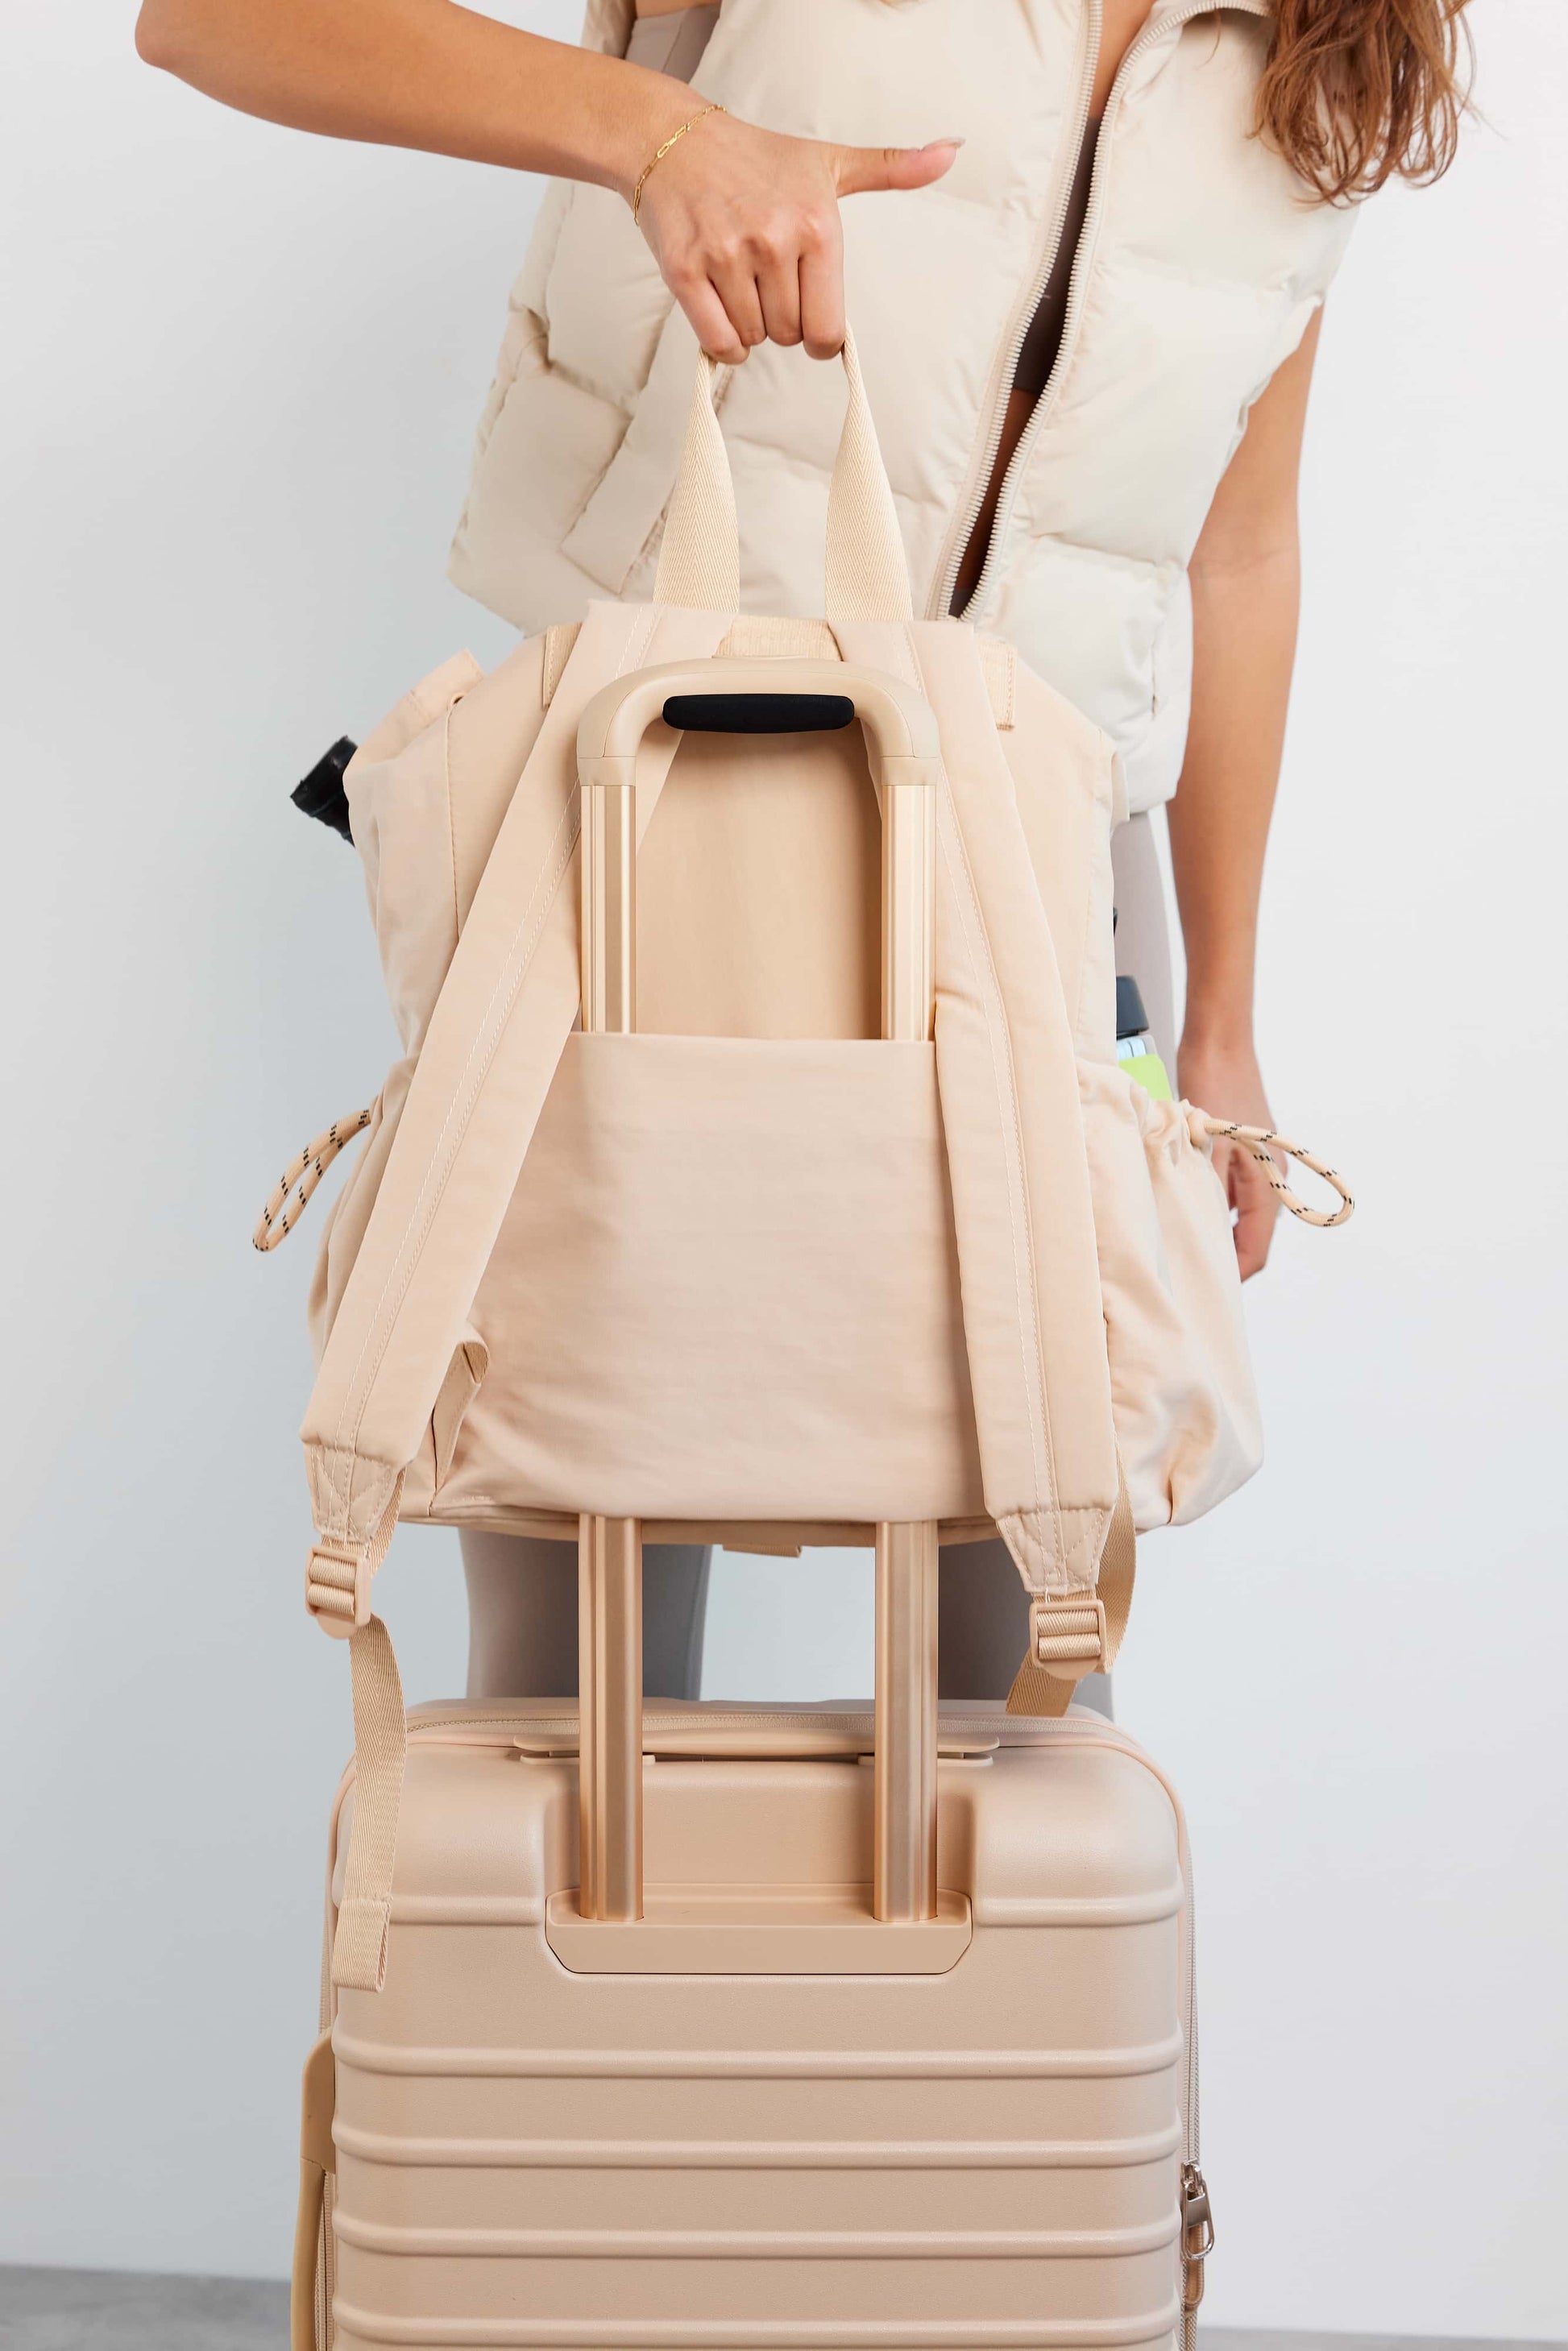 The Sport Backpack in Beige Inspired Chic Tennis - Backpack